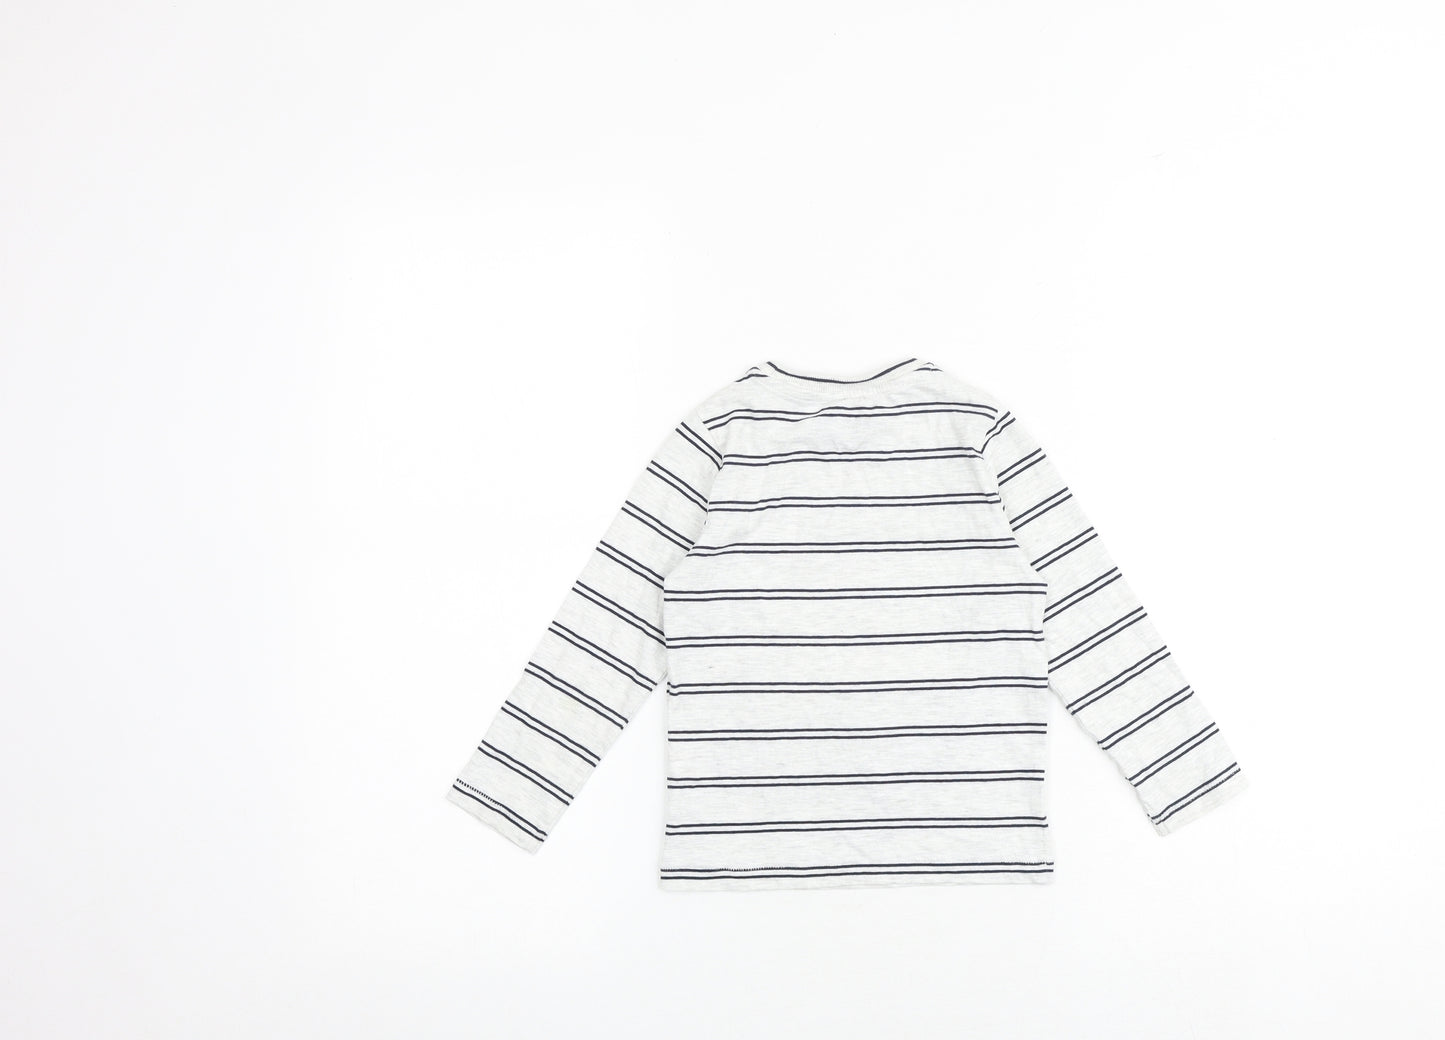 Marks and Spencer Girls Grey Striped Cotton Basic T-Shirt Size 3-4 Years Round Neck Pullover - Spaceship Helmet